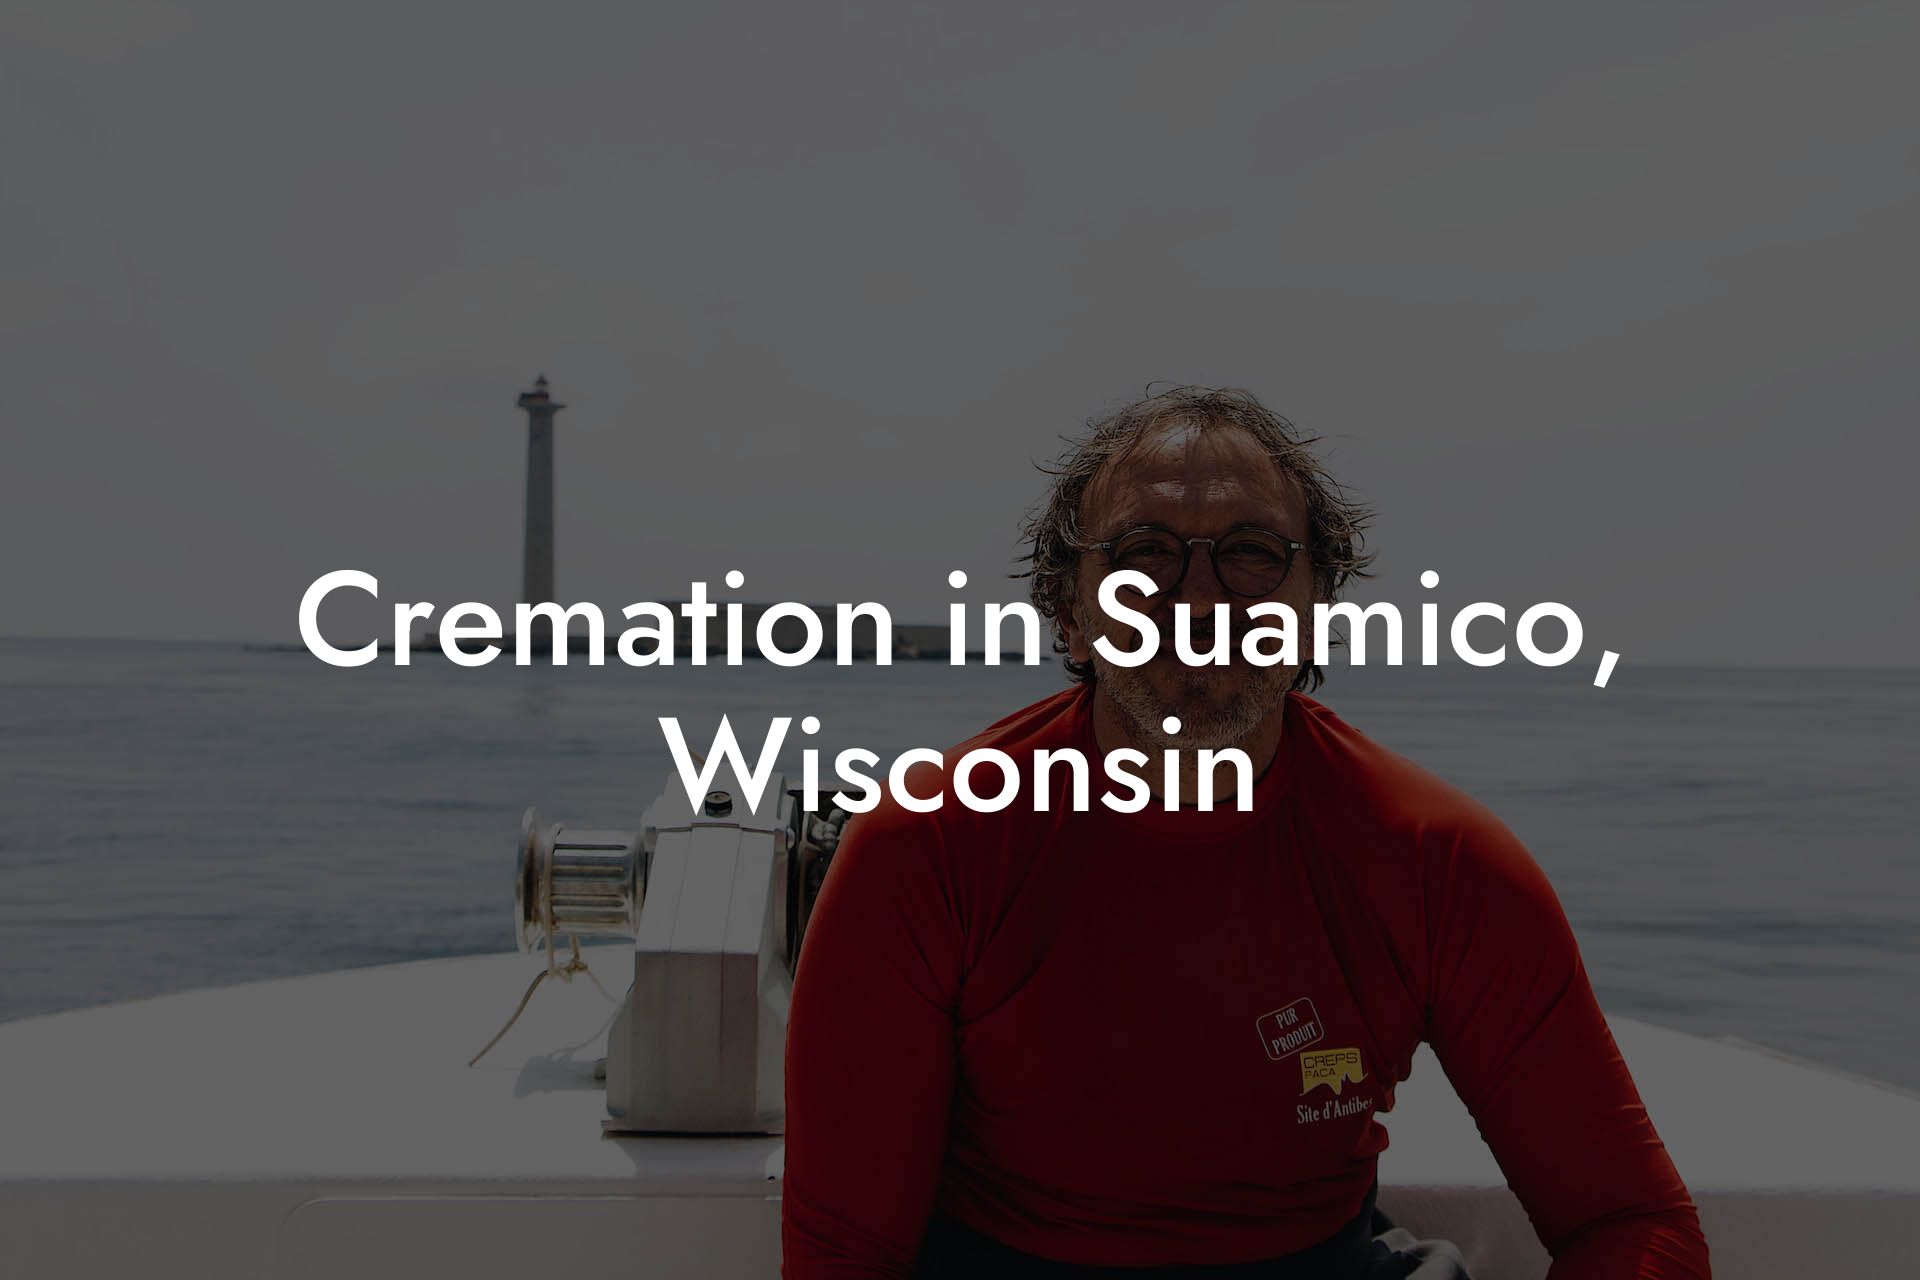 Cremation in Suamico, Wisconsin